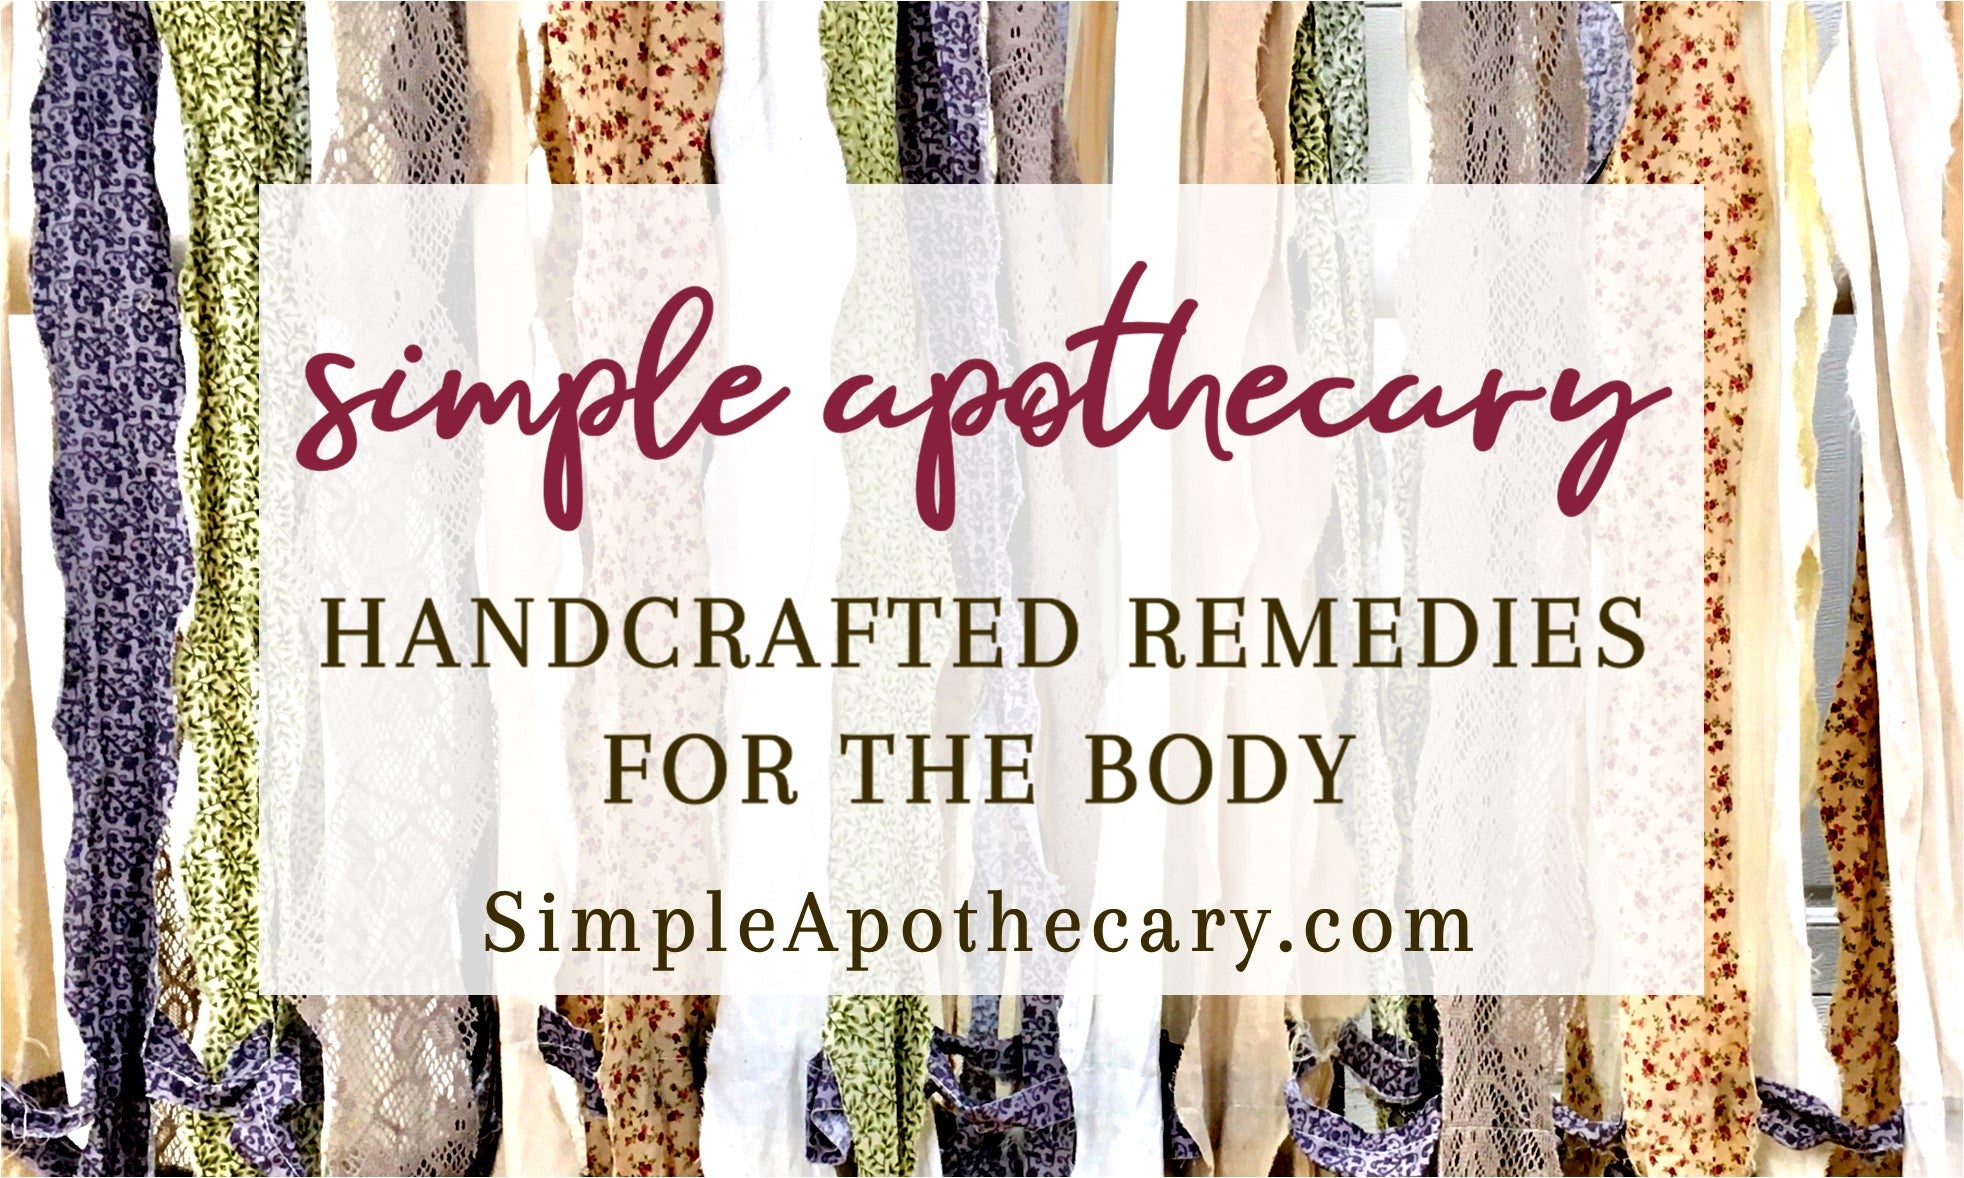 Simple Apothecary handcrafted remedies for the body in Red Bluff, CA. Hemp CBD, magnesium cream, and more natural alternatives.